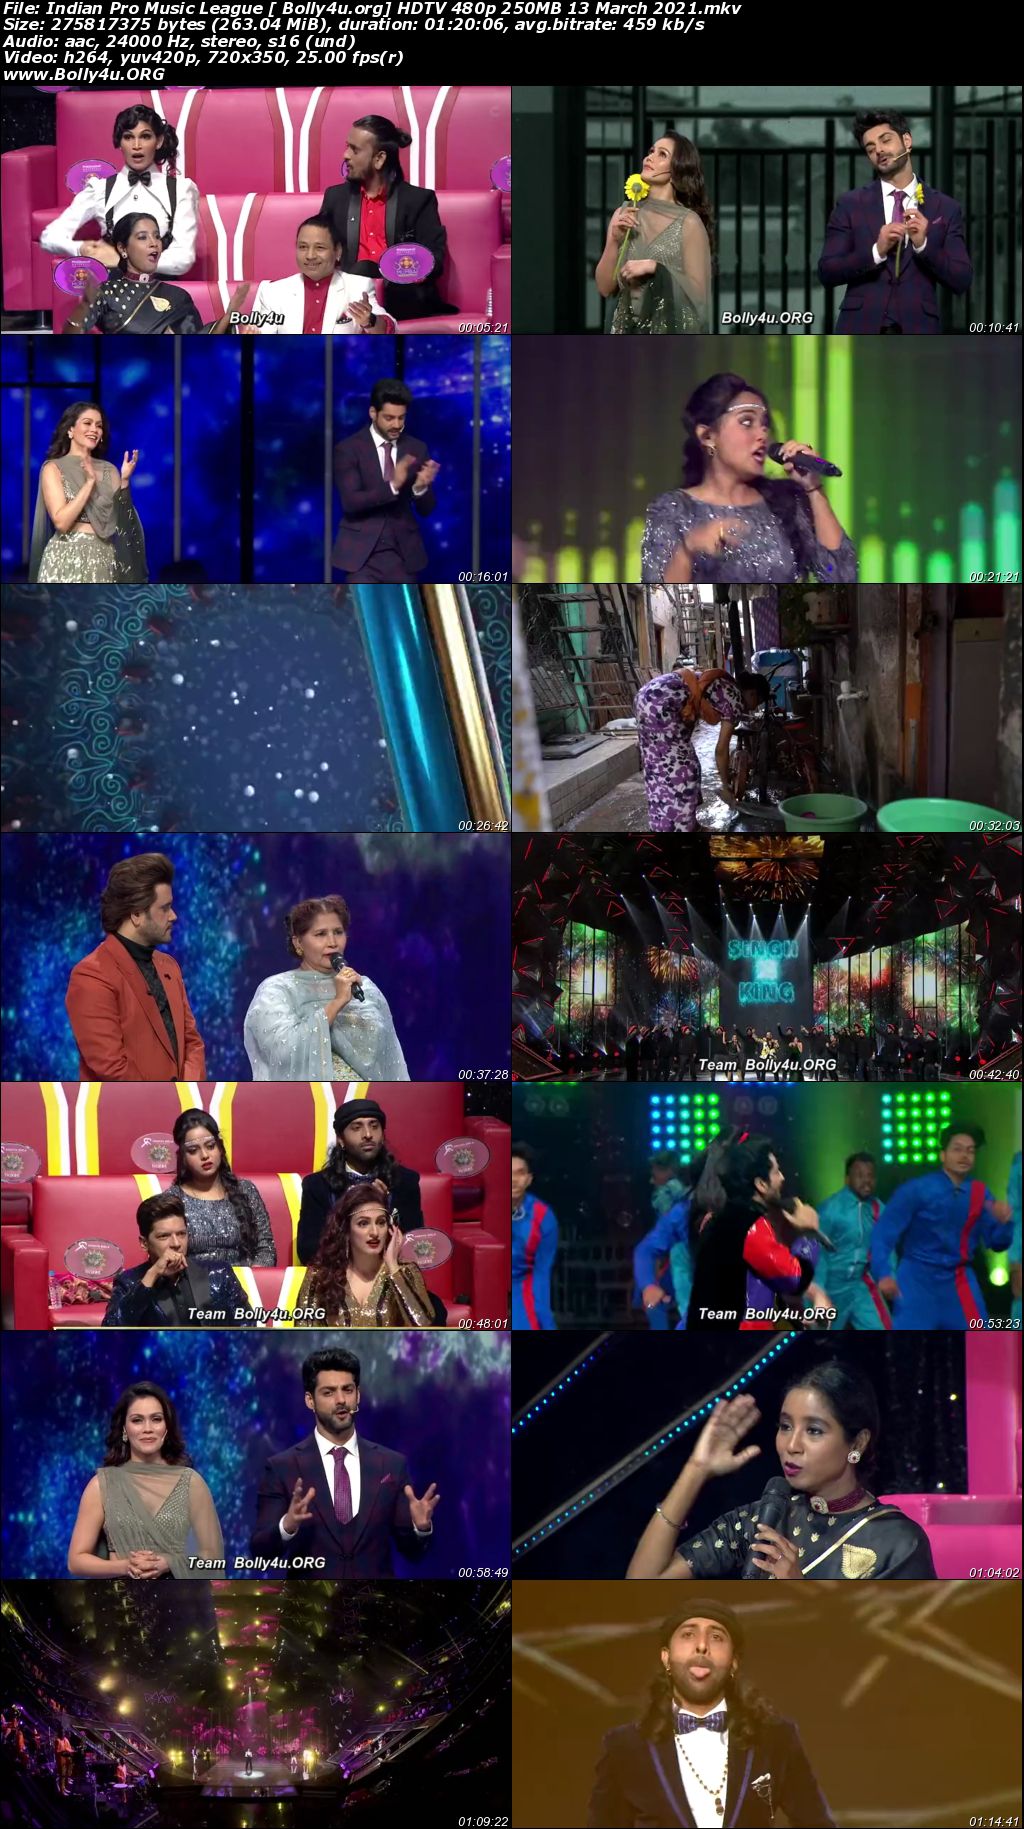 Indian Pro Music League HDTV 480p 250MB 13 March 2021 Download